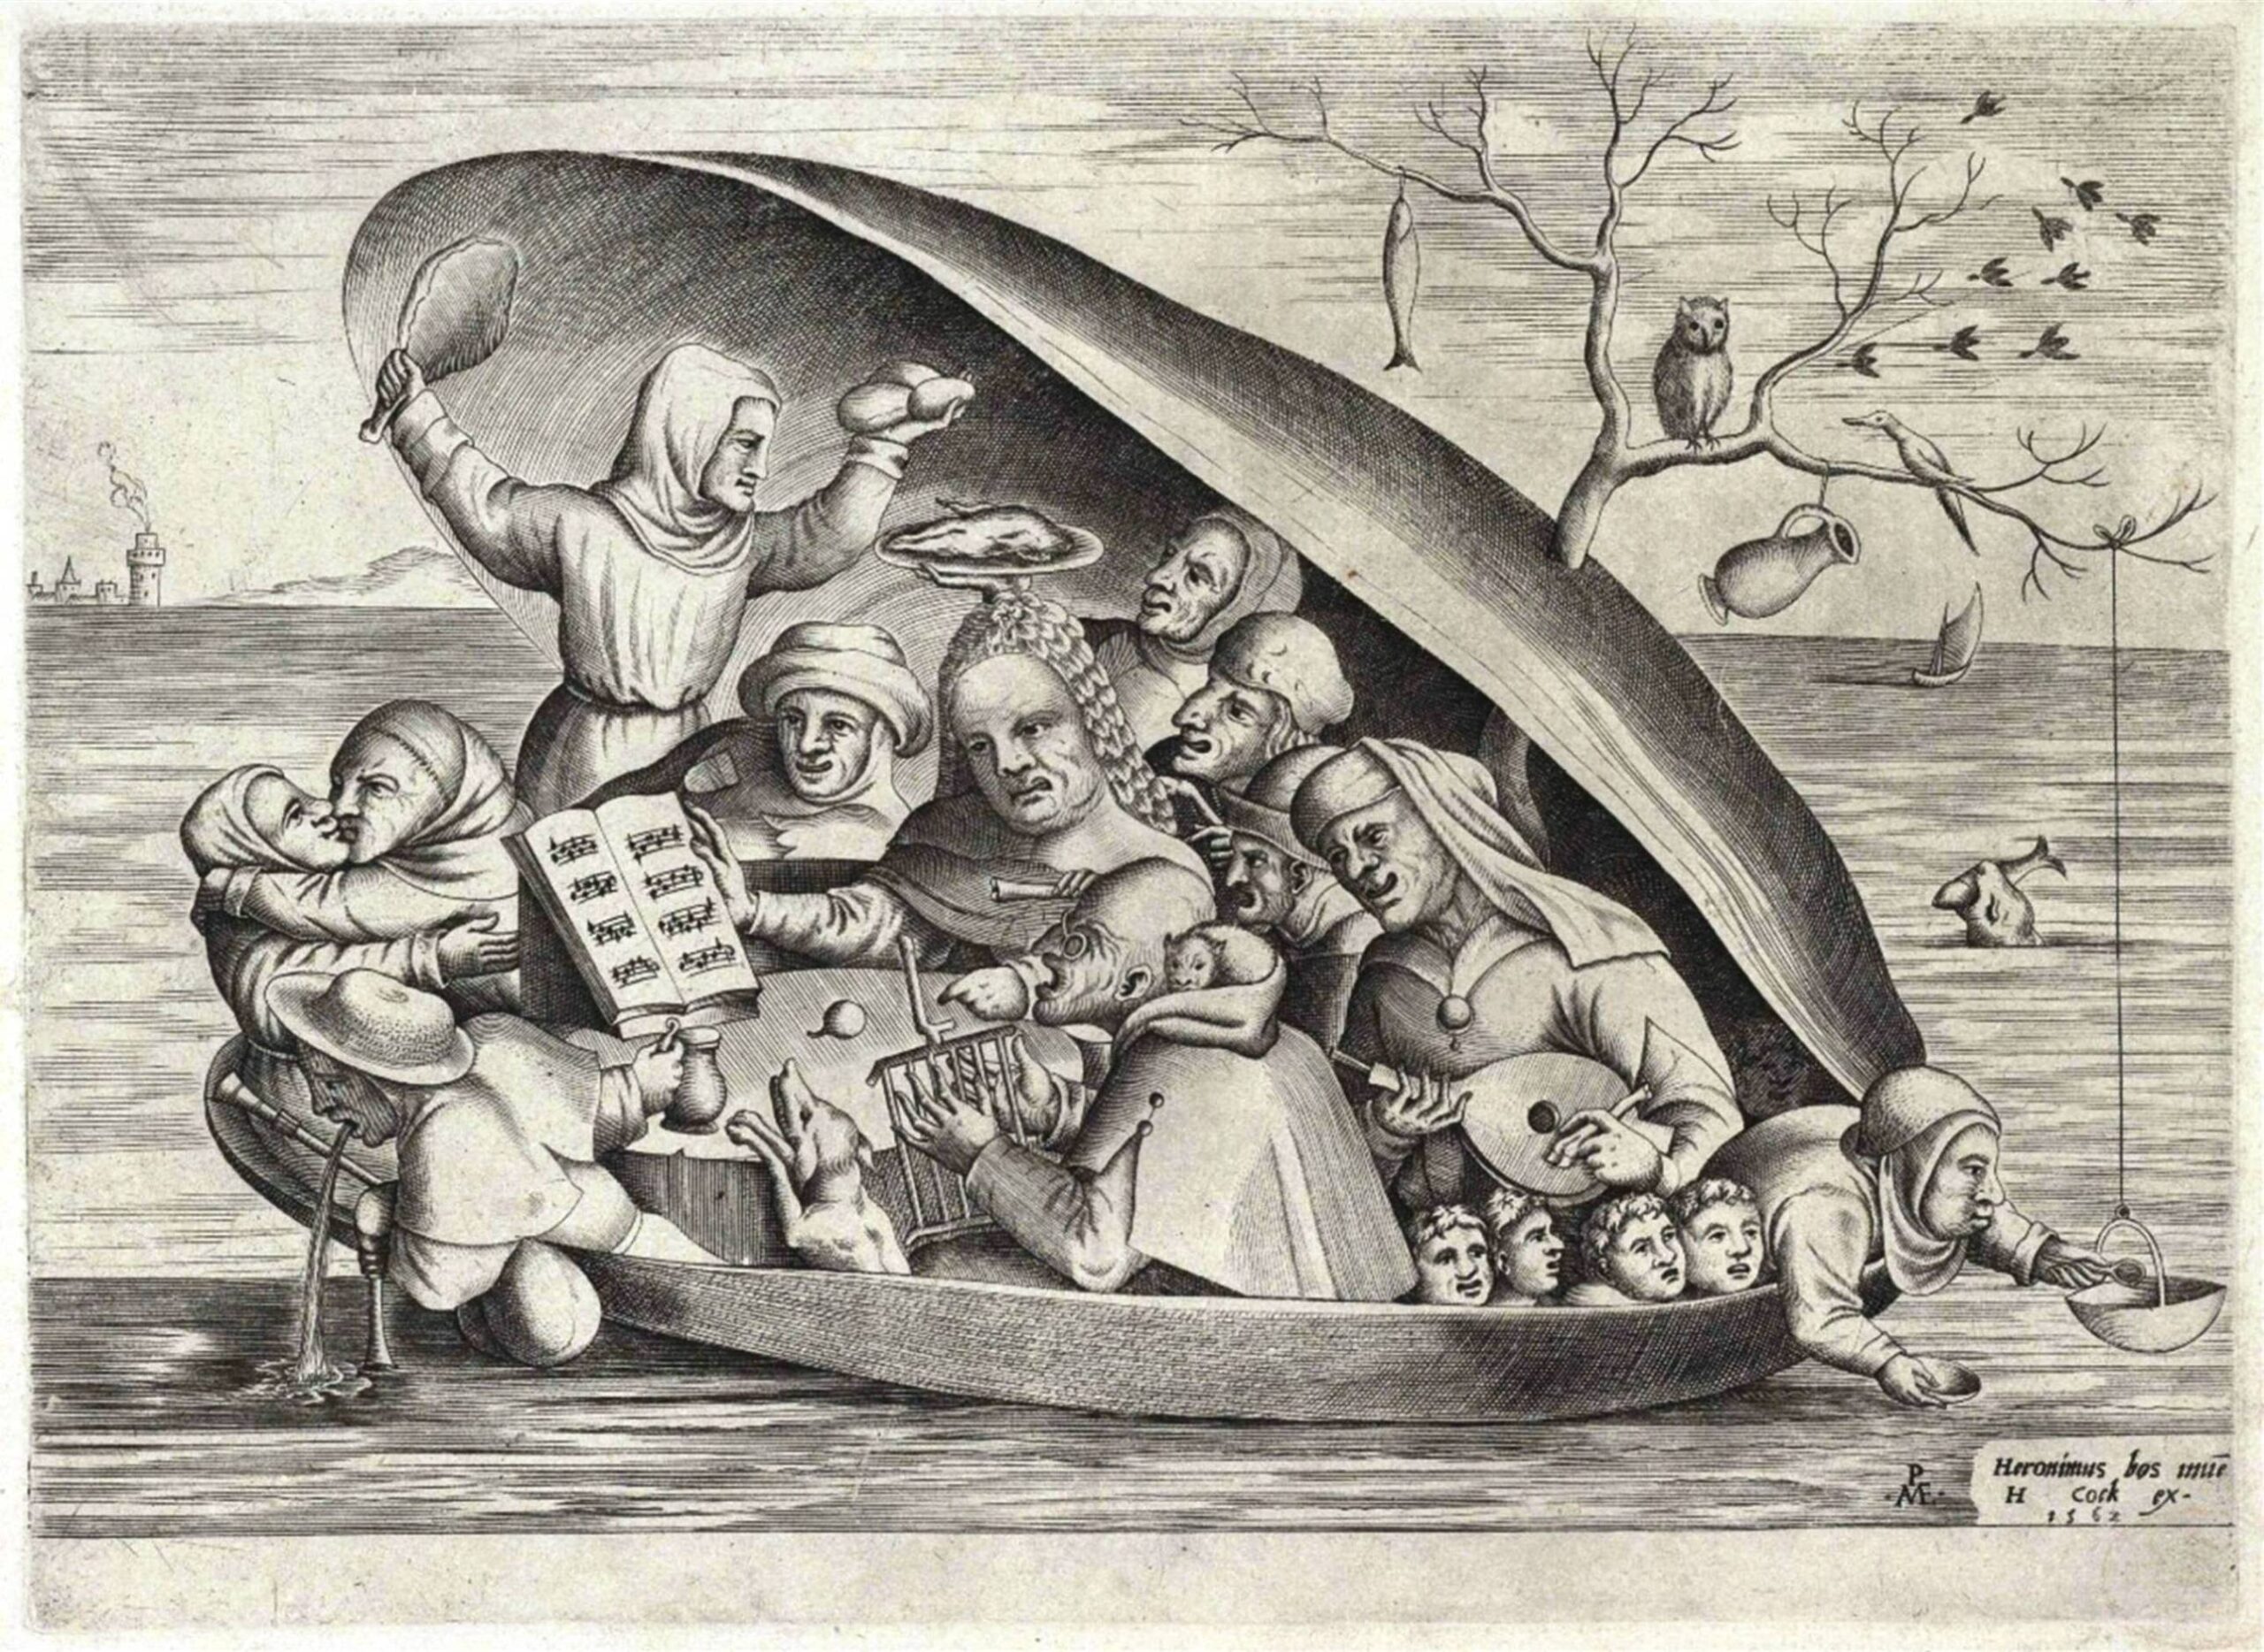 An engraving by Pieter van der Heyden, Merrymakers in a Mussel Shell, 1562, published by Hieronymus Cock with the false attribution, “Heronimus bos inue[ntor]”